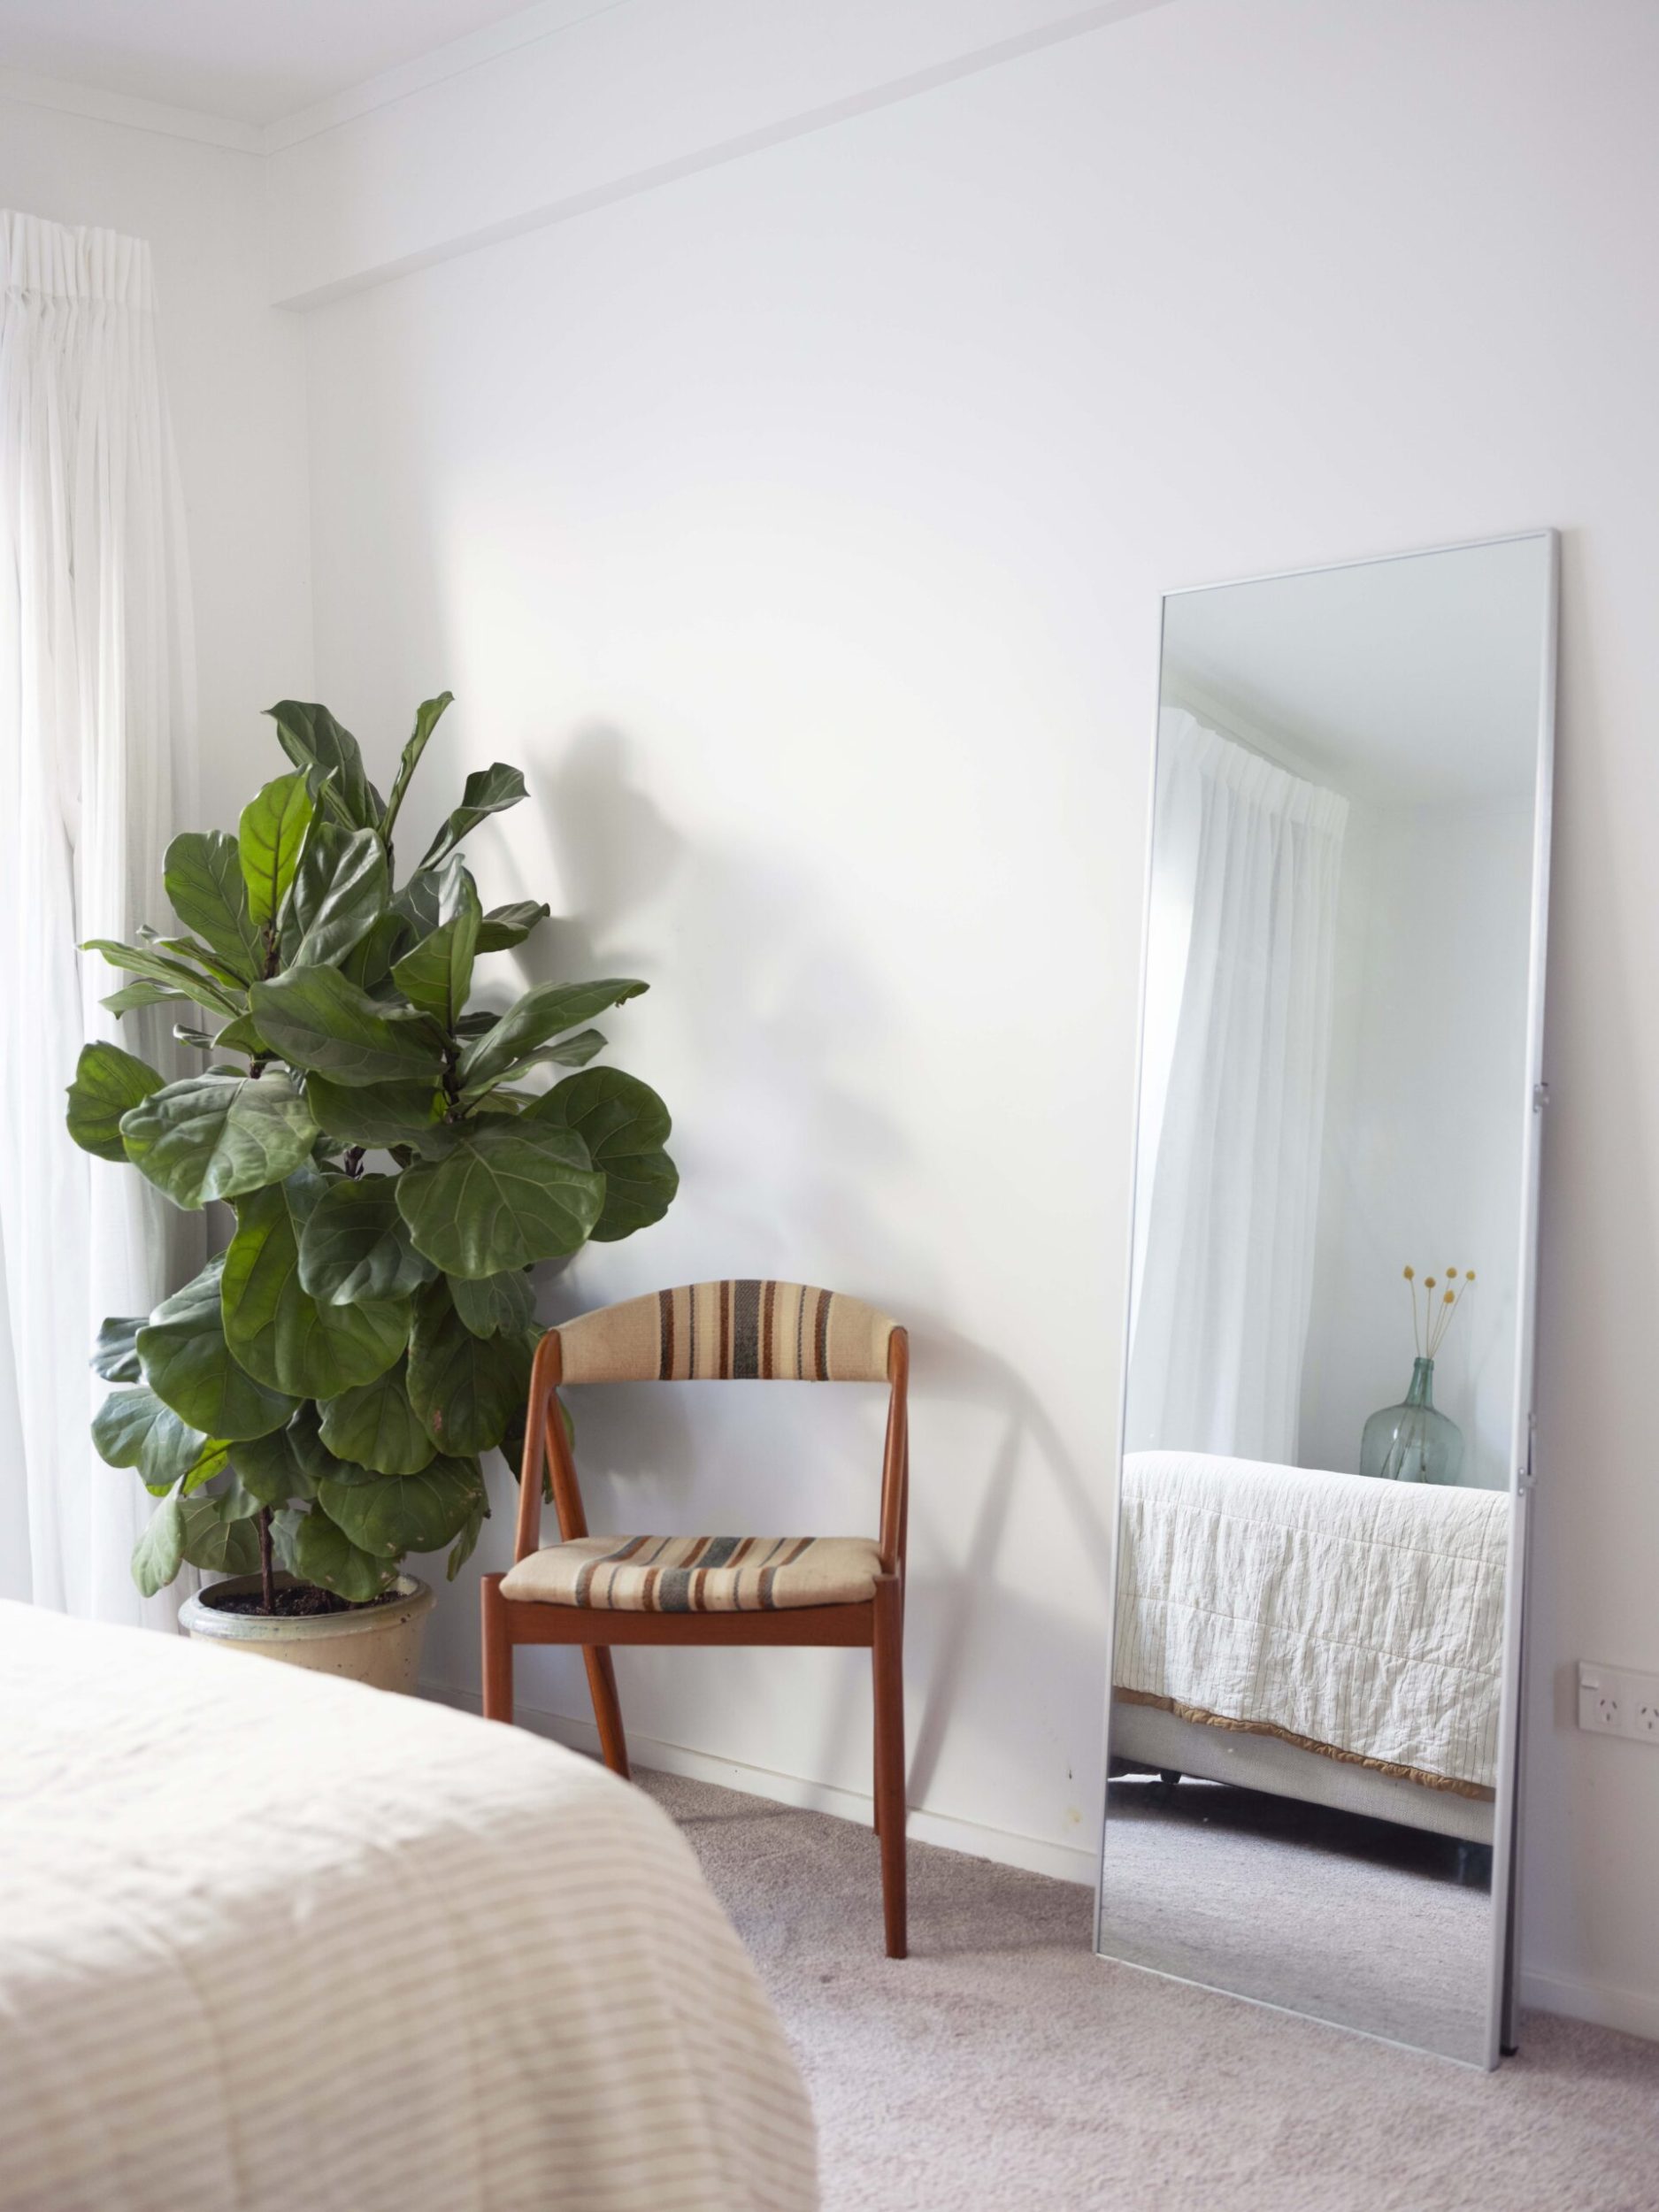 Corner of bedroom with full length mirror, fiddle leaf fig plant and chair